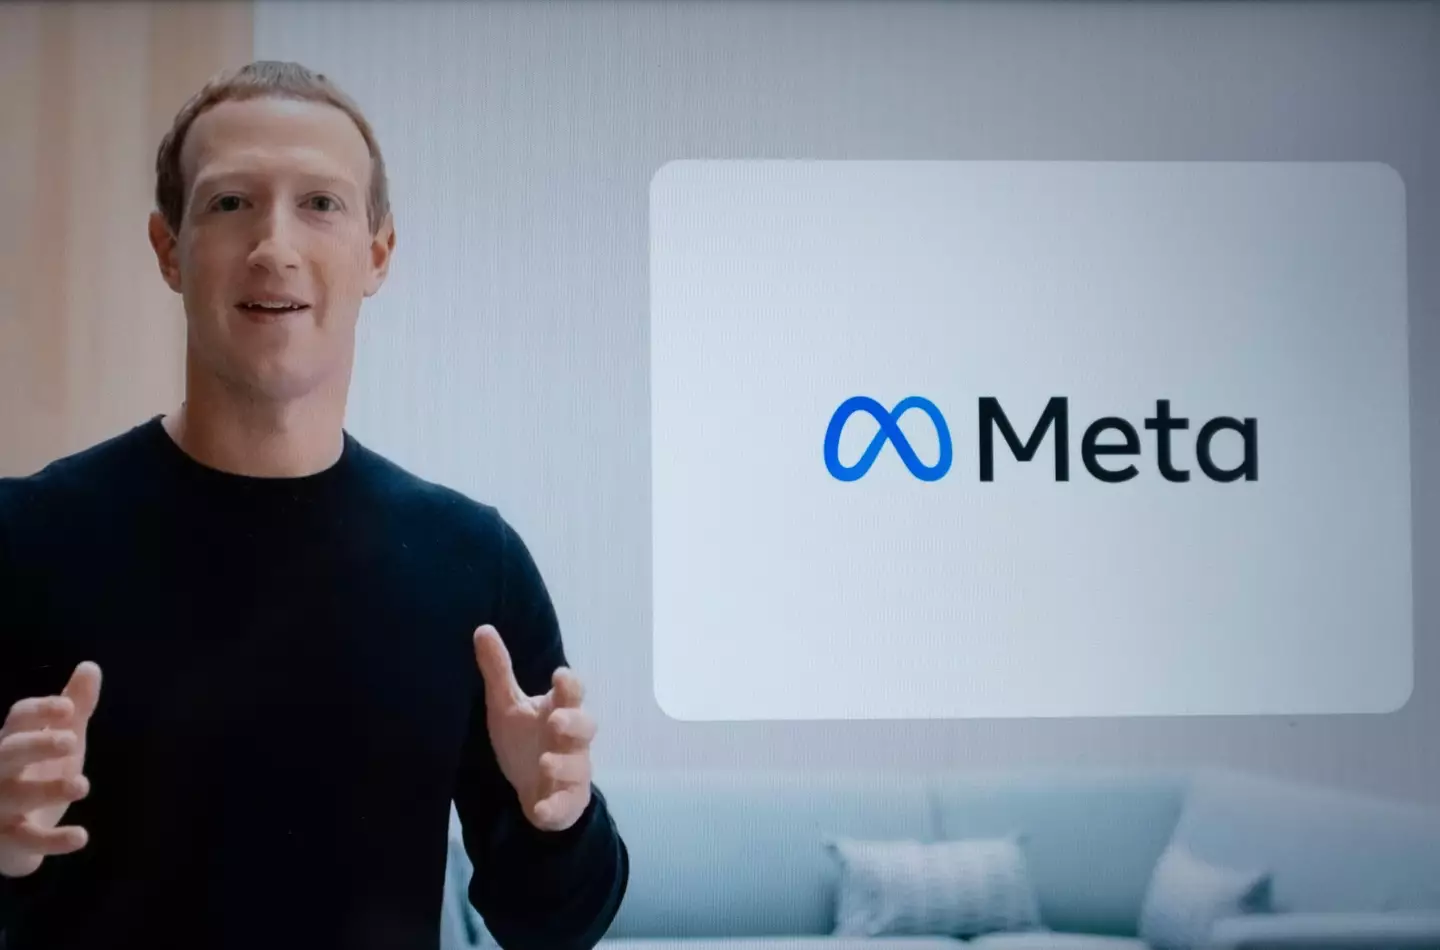 Meta shares jumped after Zuckerberg announced plans for the 2023.